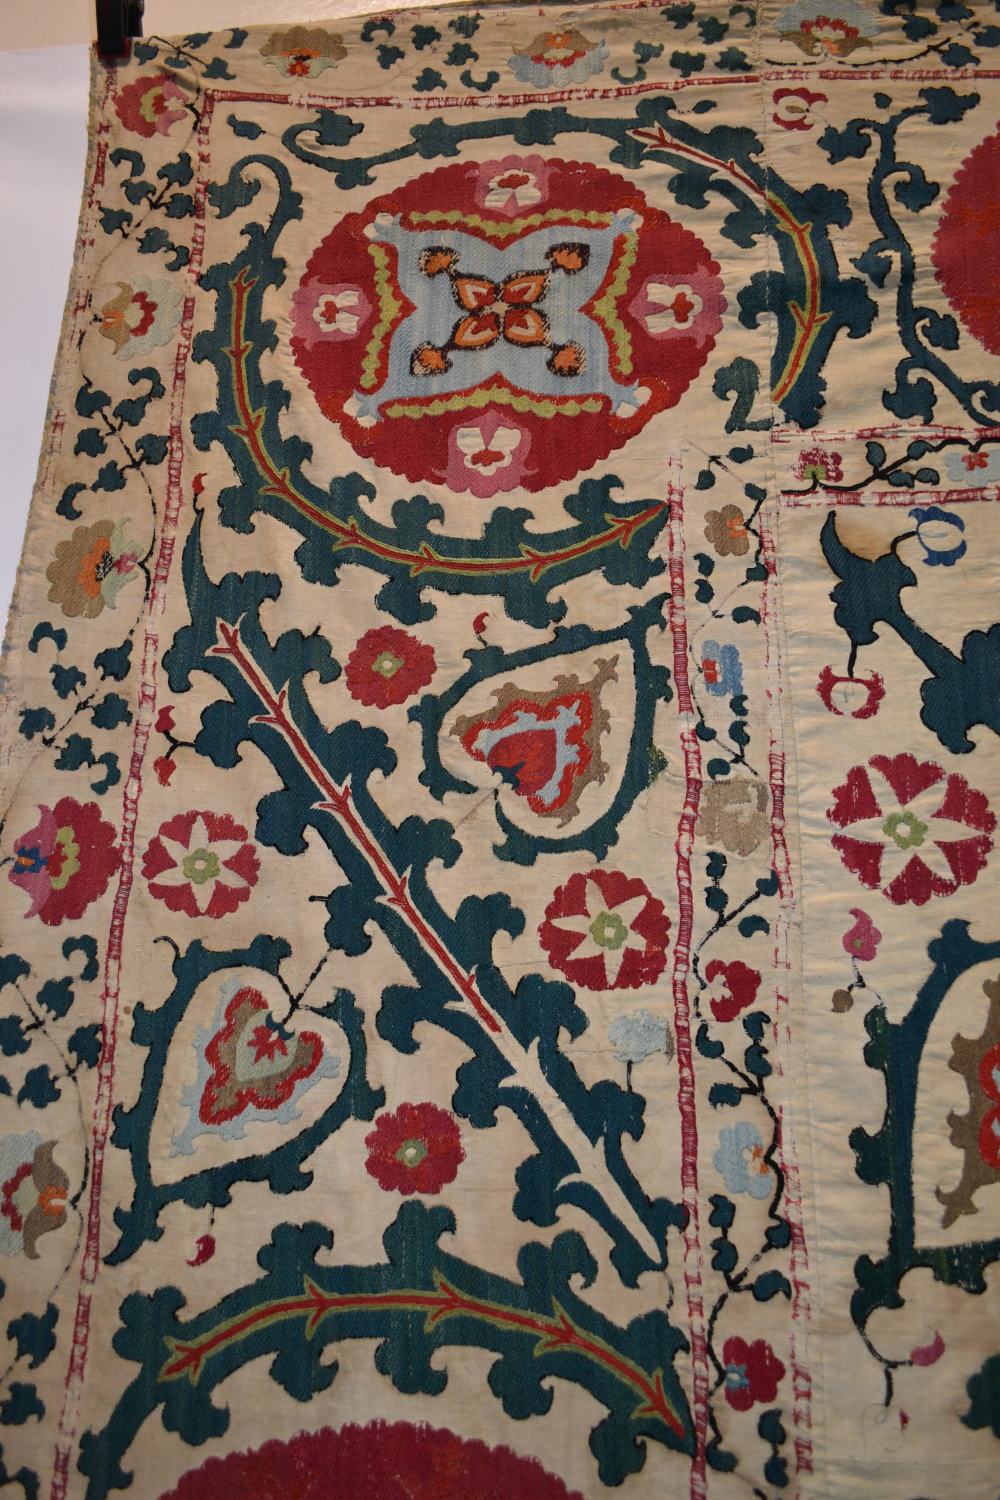 Attractive suzani, probably Bokhara, Uzbekistan, late 19th/early 20th century, cotton ground - Image 7 of 8